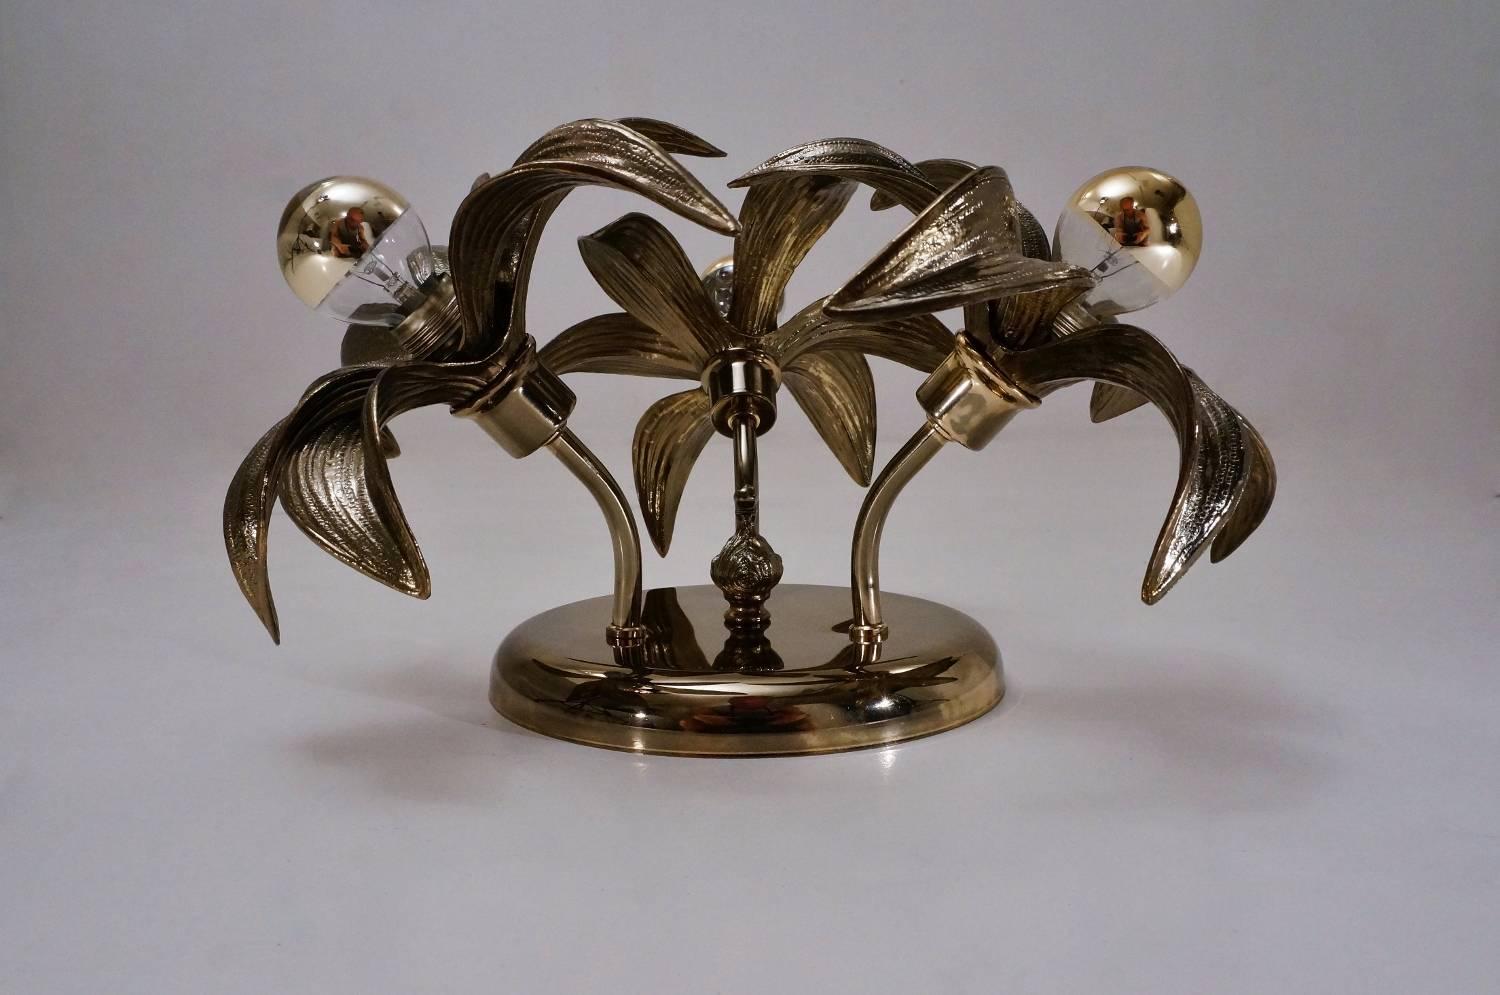 Brass flower light with three flowers in the style of the famous designer Willy Daro. These lights are by Massive Lighting, circa 1970s, Belgian.

Thoroughly cleaned, fully rewired, in full working order and ready to use.

This vintage ceiling light